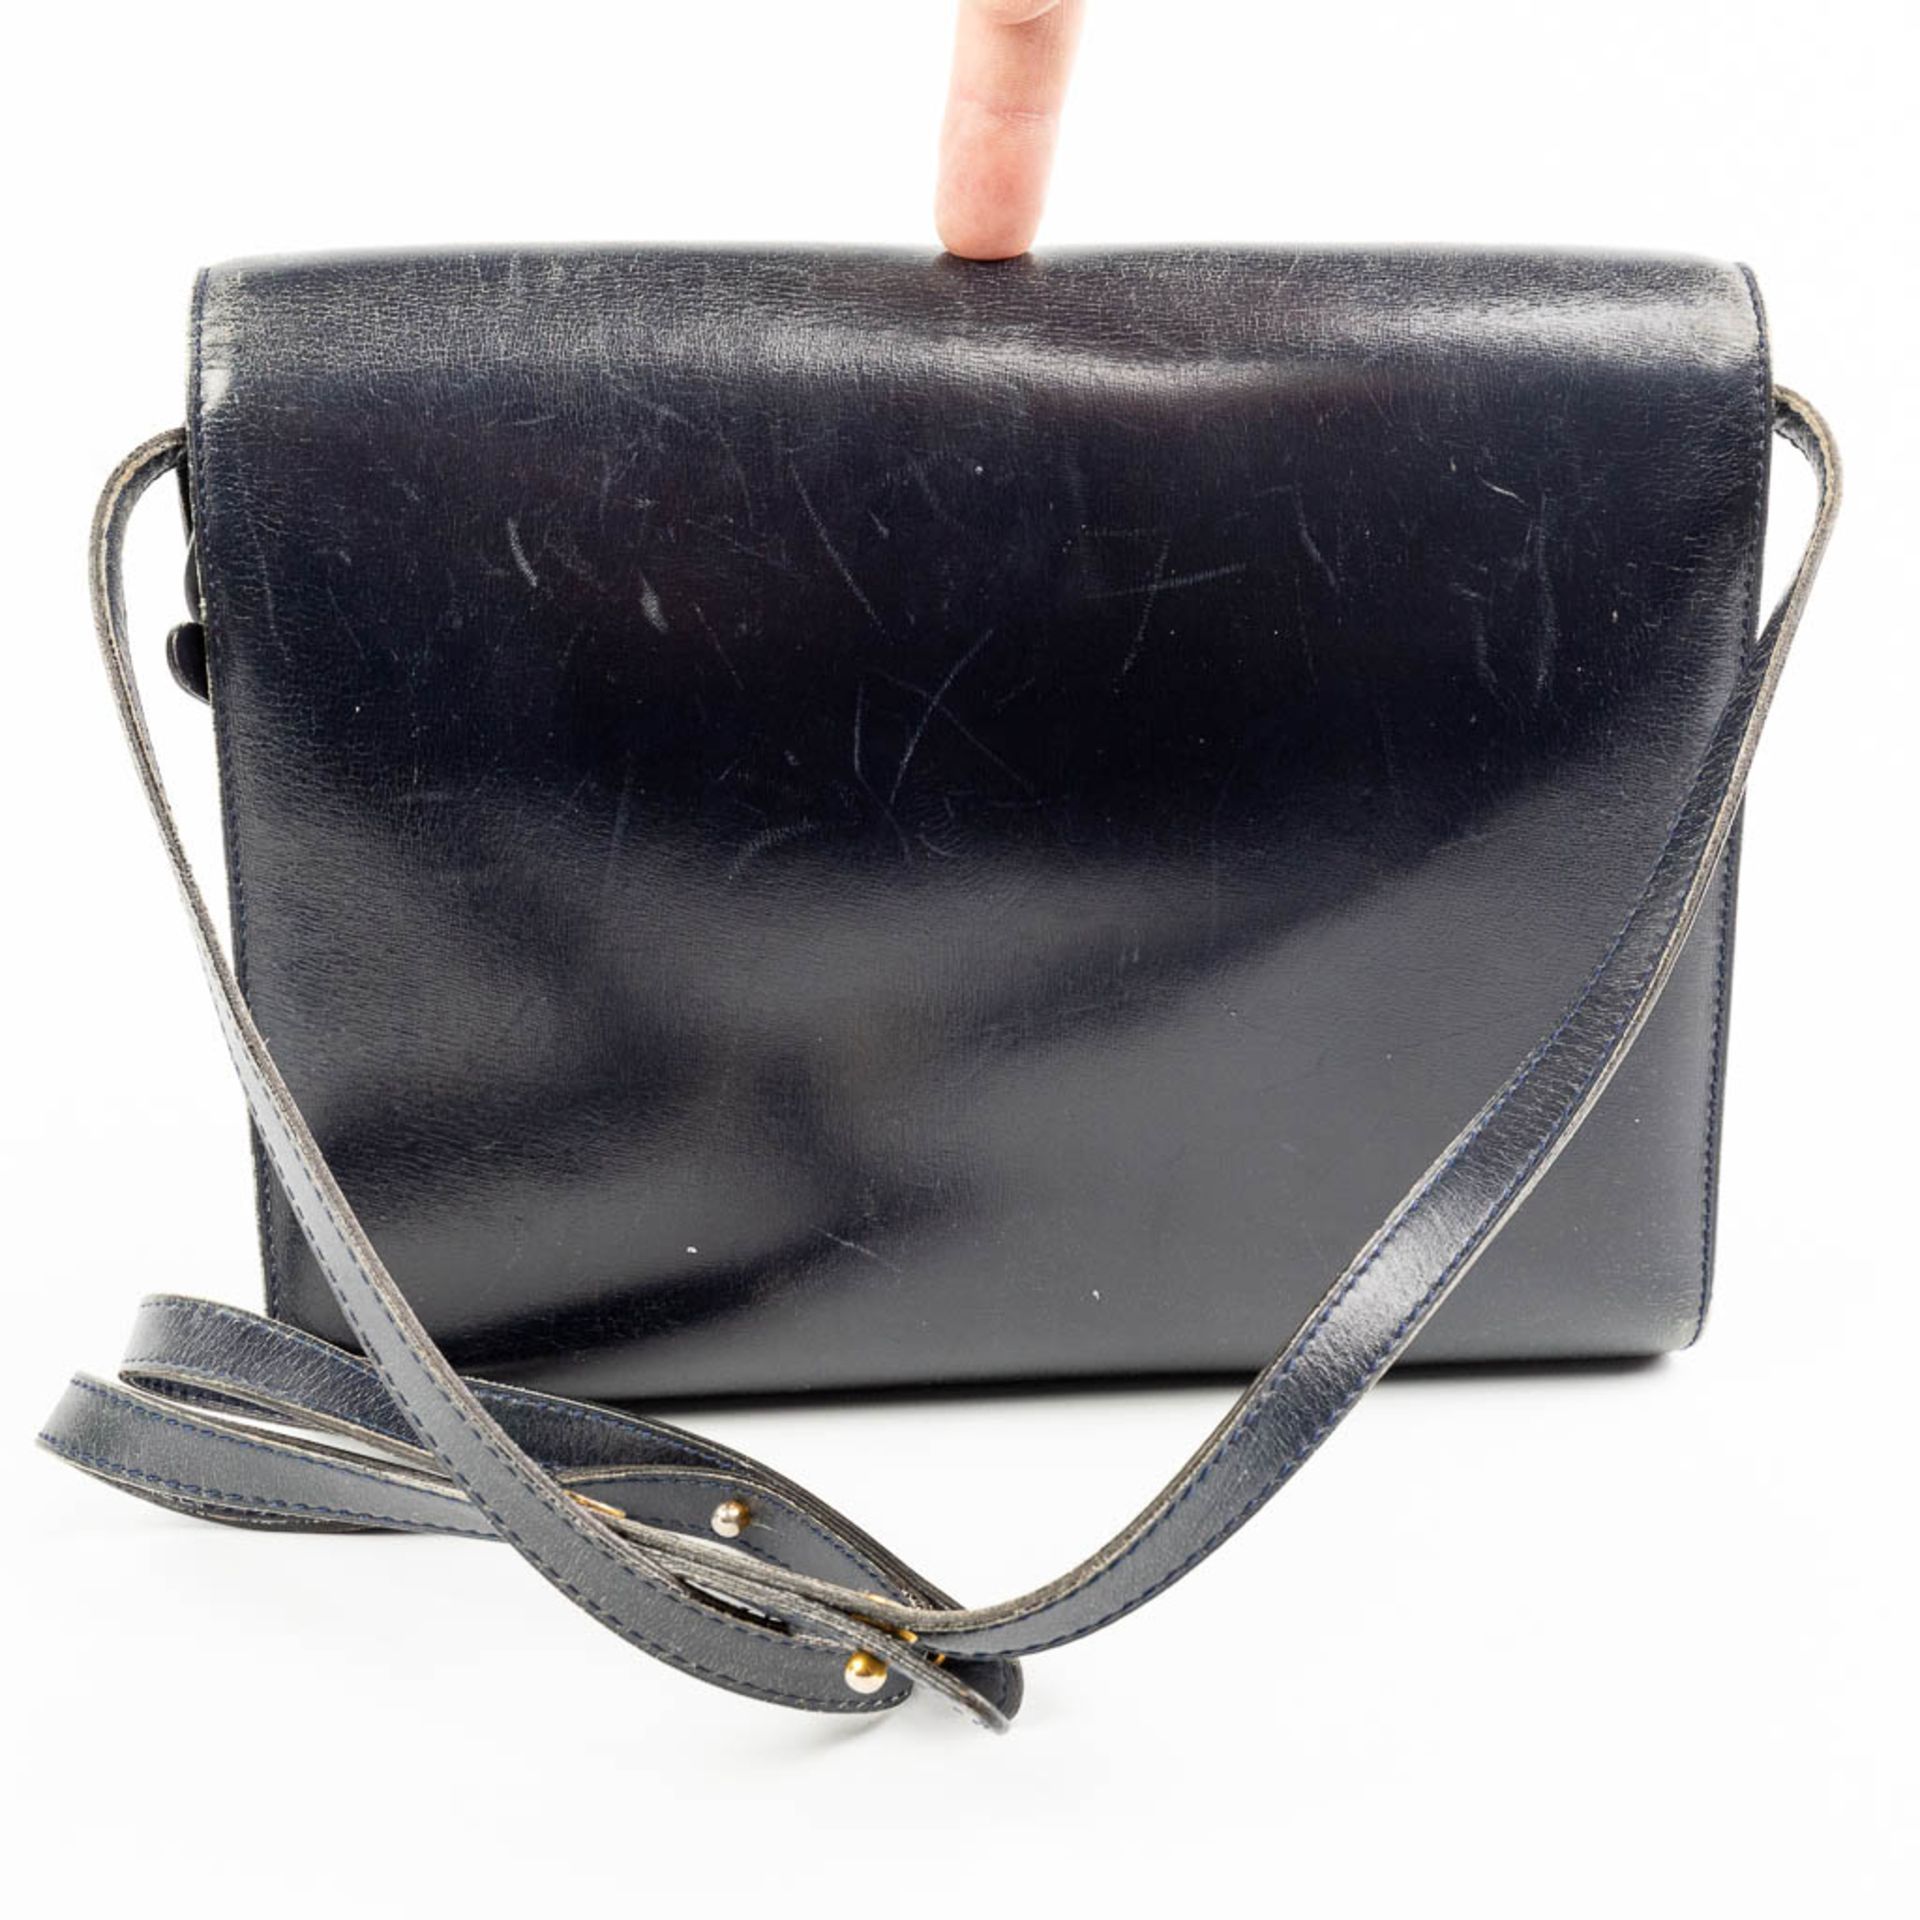 A purse made of black leather and marked Delvaux. - Image 6 of 10